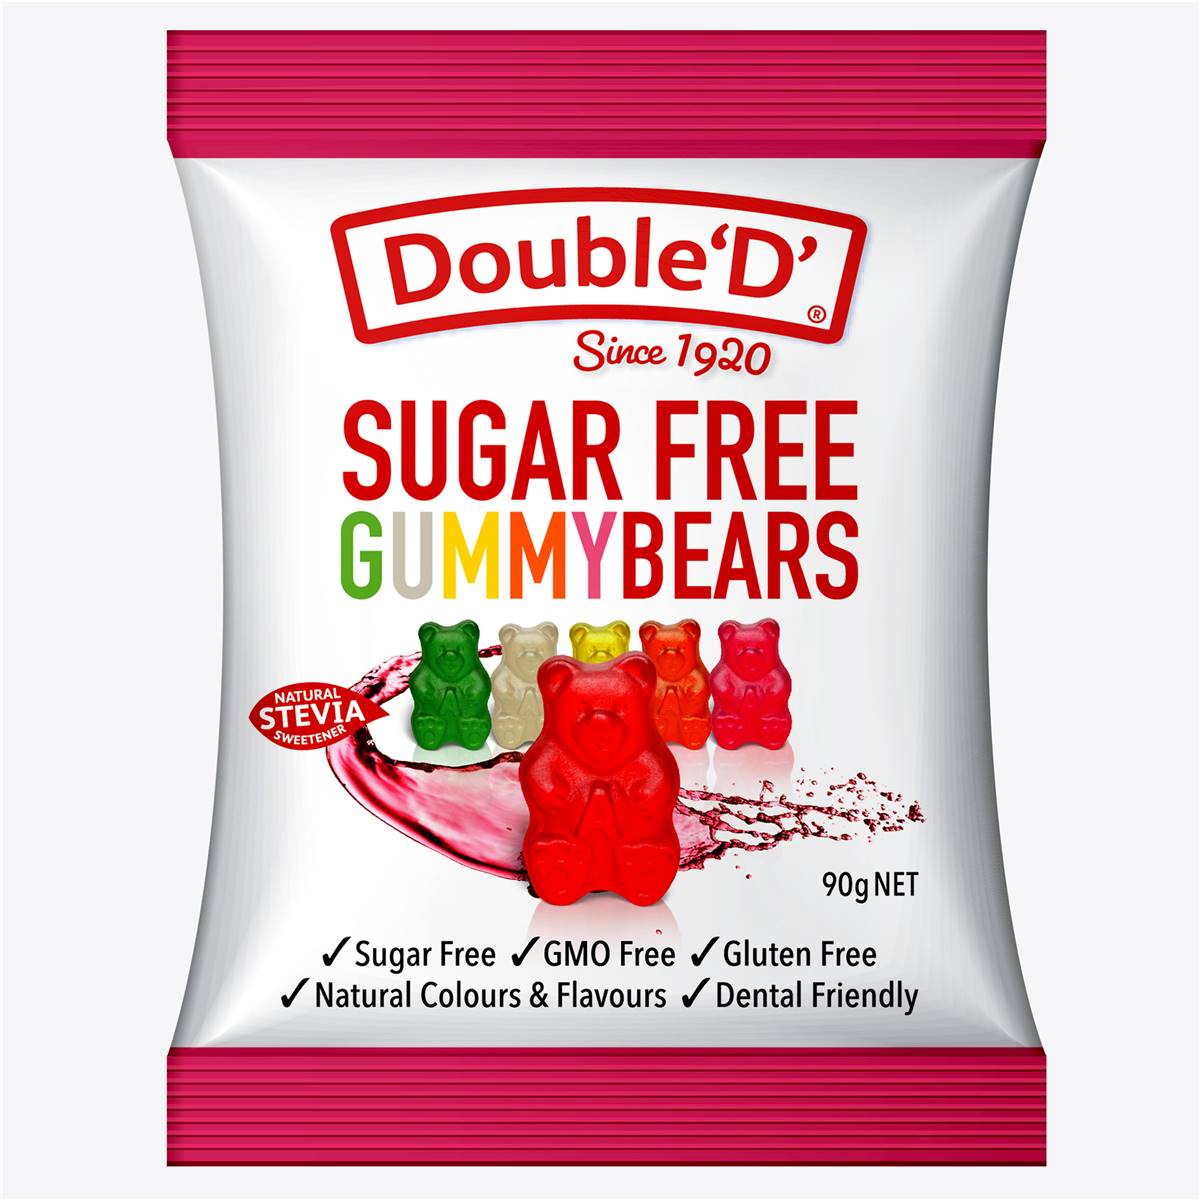 Calories in Double D Gummy Bears Sugar Free